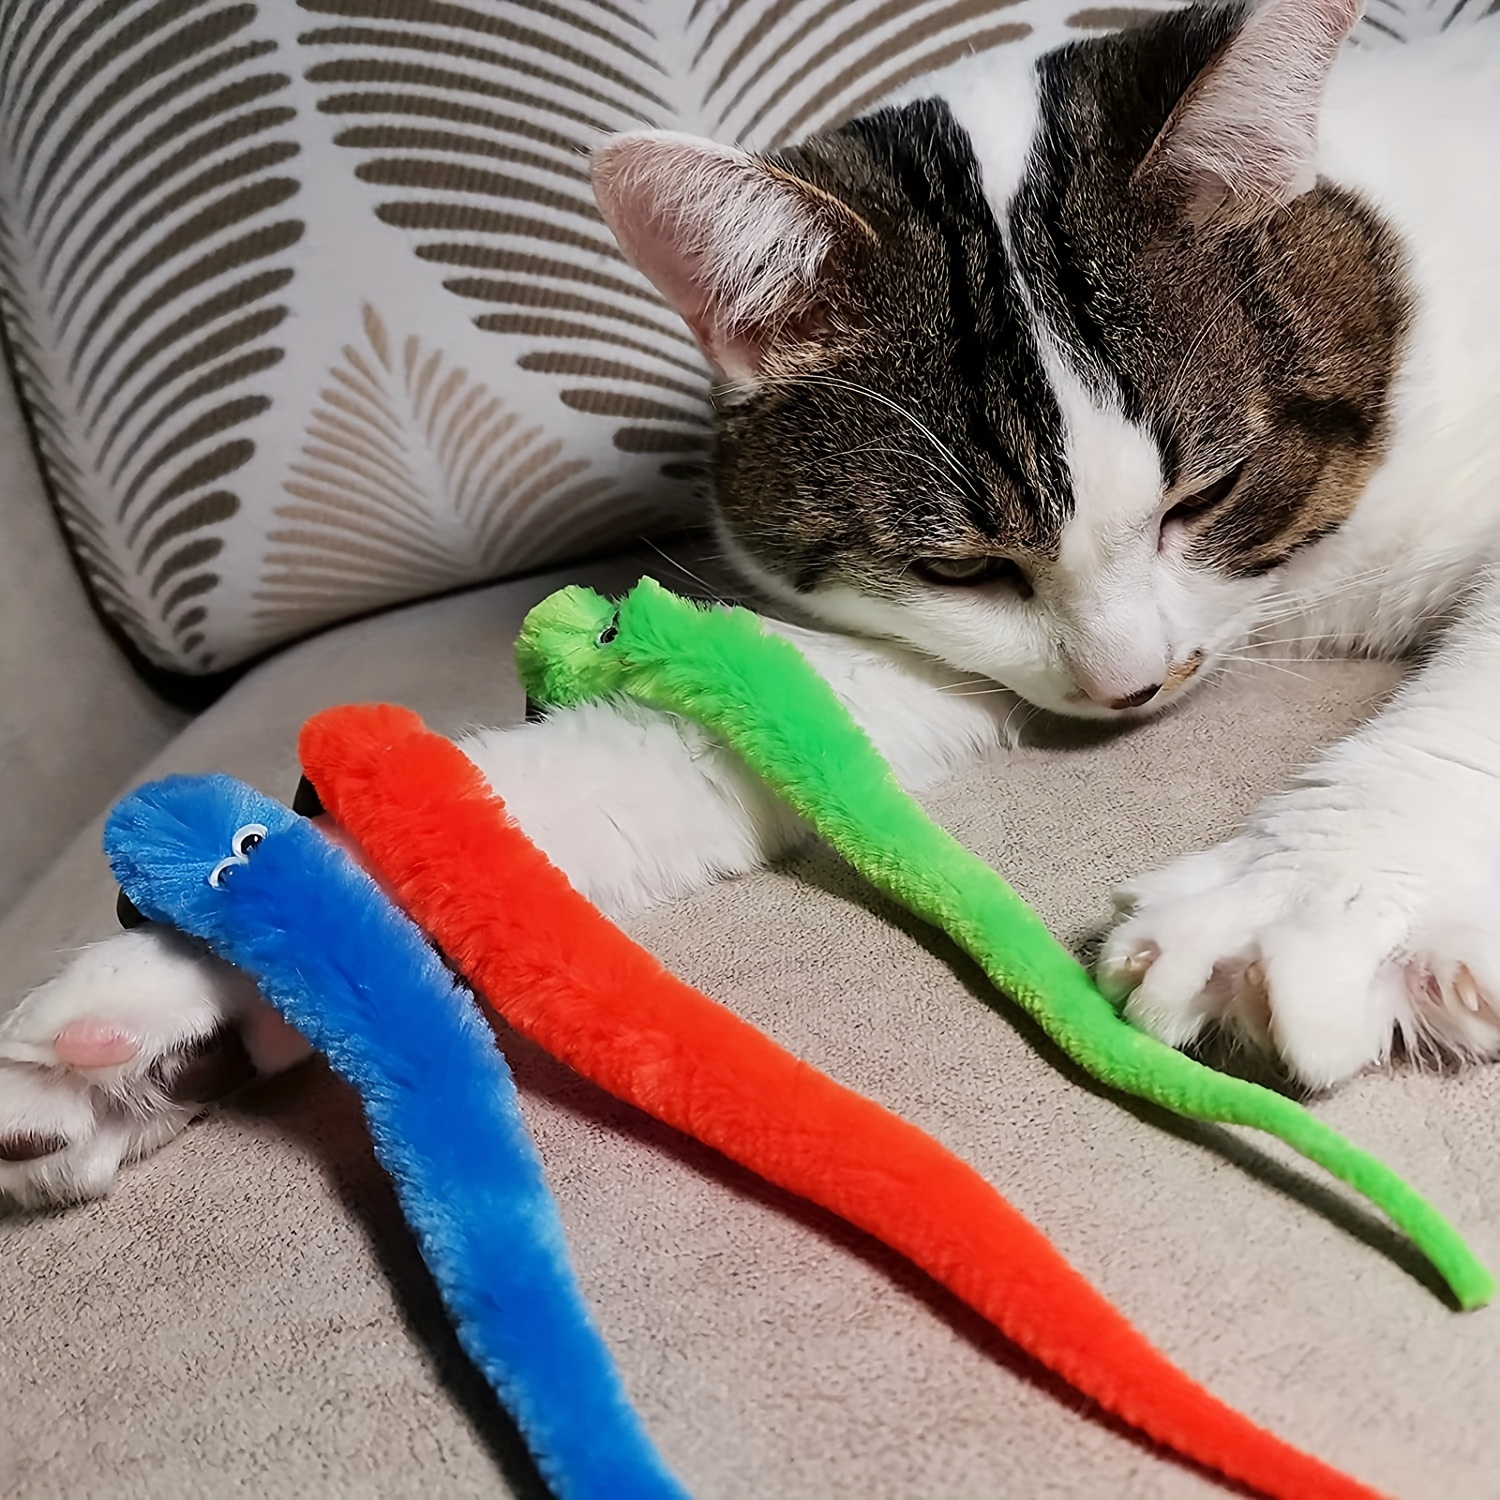 

15pcs Cat Worm Toy Refills Cat Toy Wand Replacement Worms, Interactive Cat Teaser Toy Assorted Color